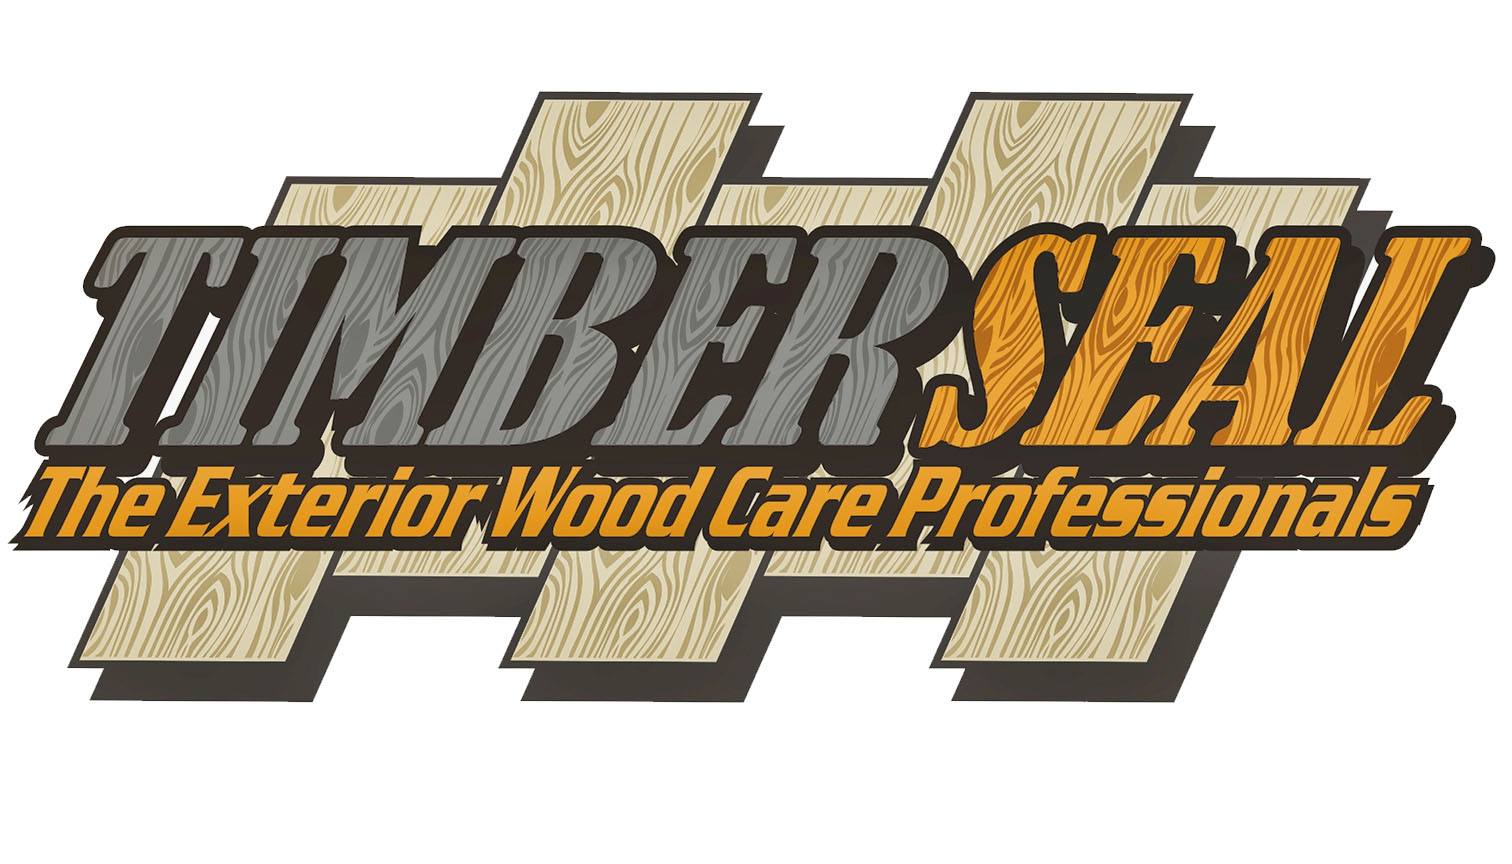 Looking for an Exciting Change in Work? Timberseal, LLC is Now Hiring a Restoration Technician